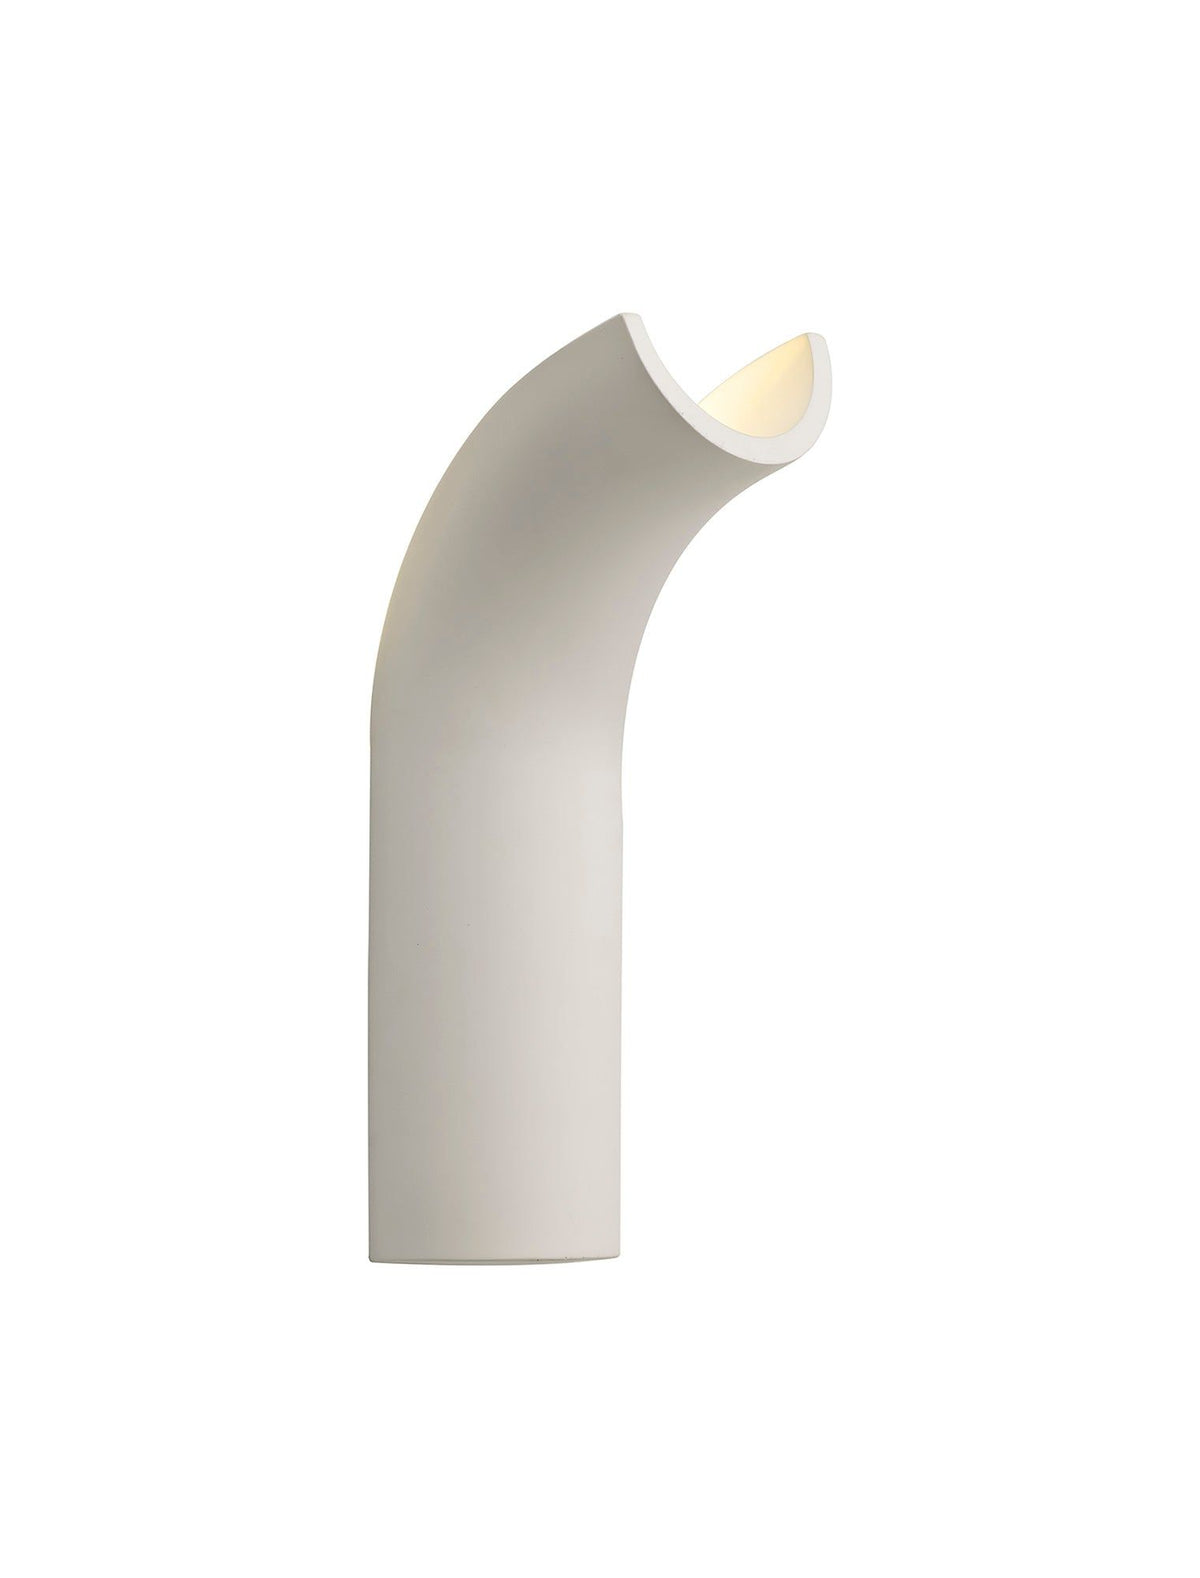 Adnonis Uplighter Wall Lamp, 1 x 4.5W LED, 3000K, 275lm, White Paintable Gypsum, 3yrs Warranty